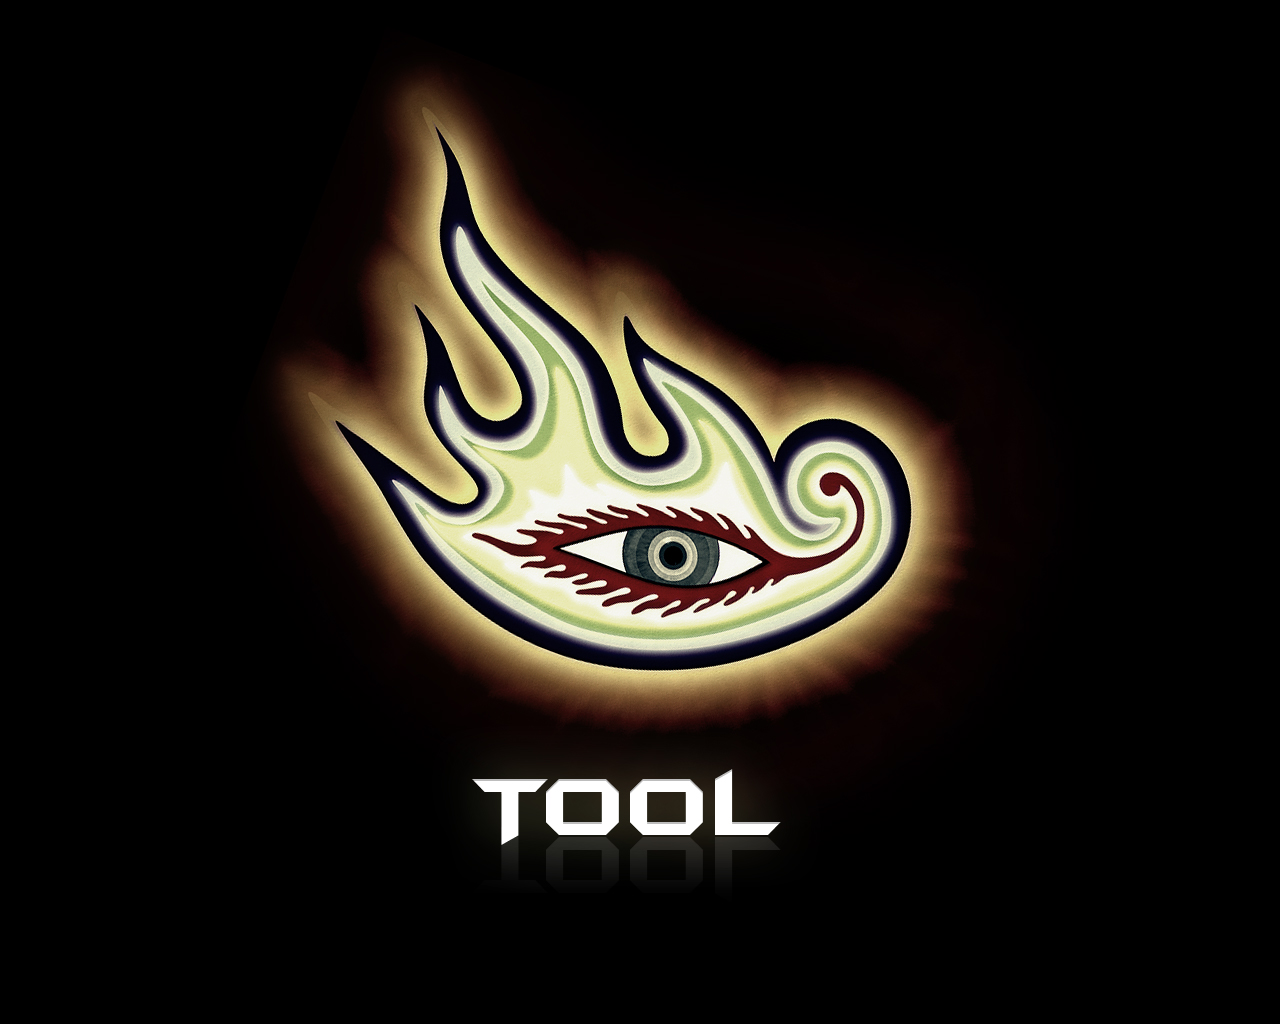 Tool Wallpaper. by DxTEARia on DeviantArt